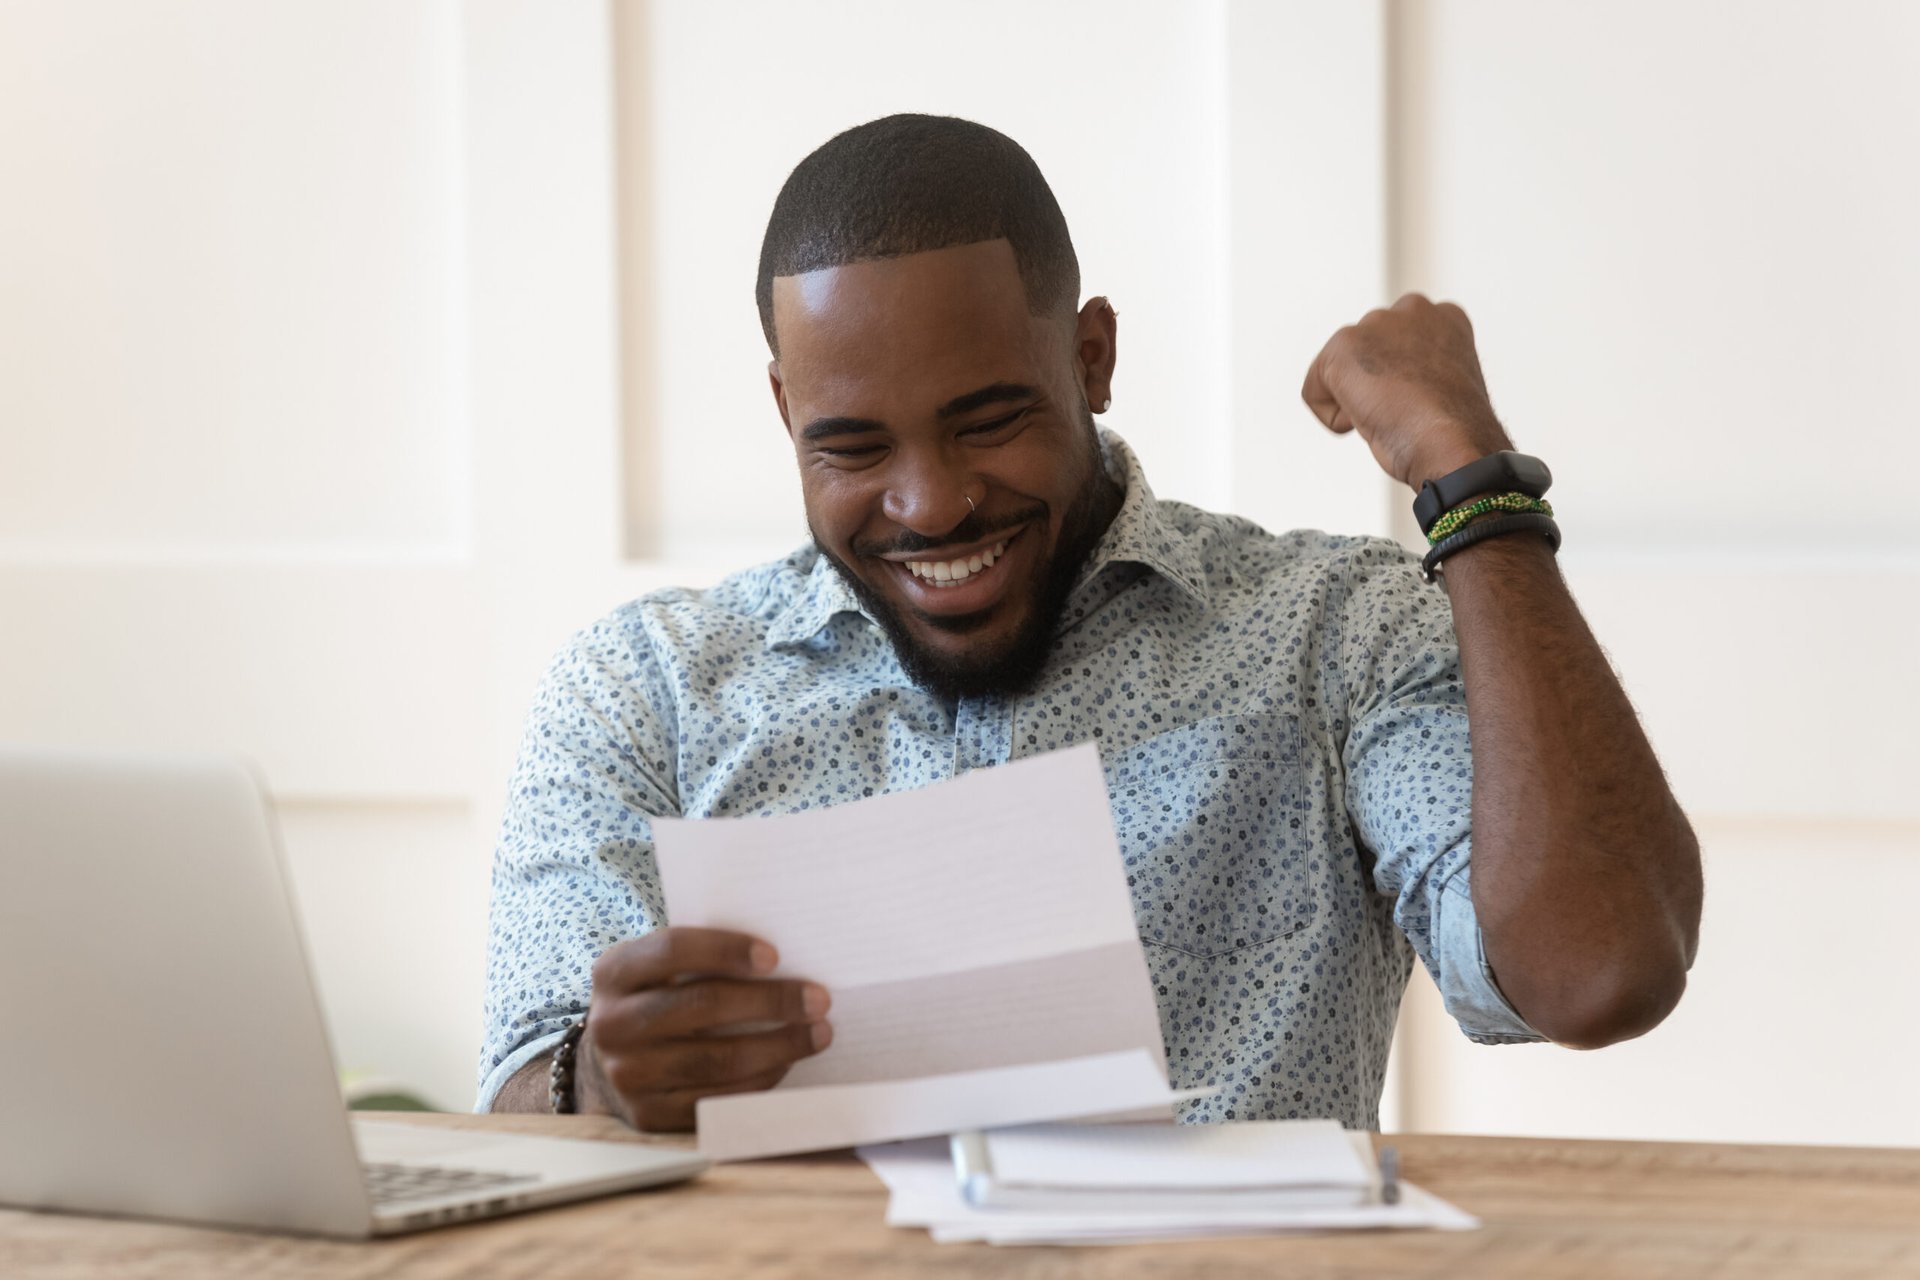 Man excited about his free credit report